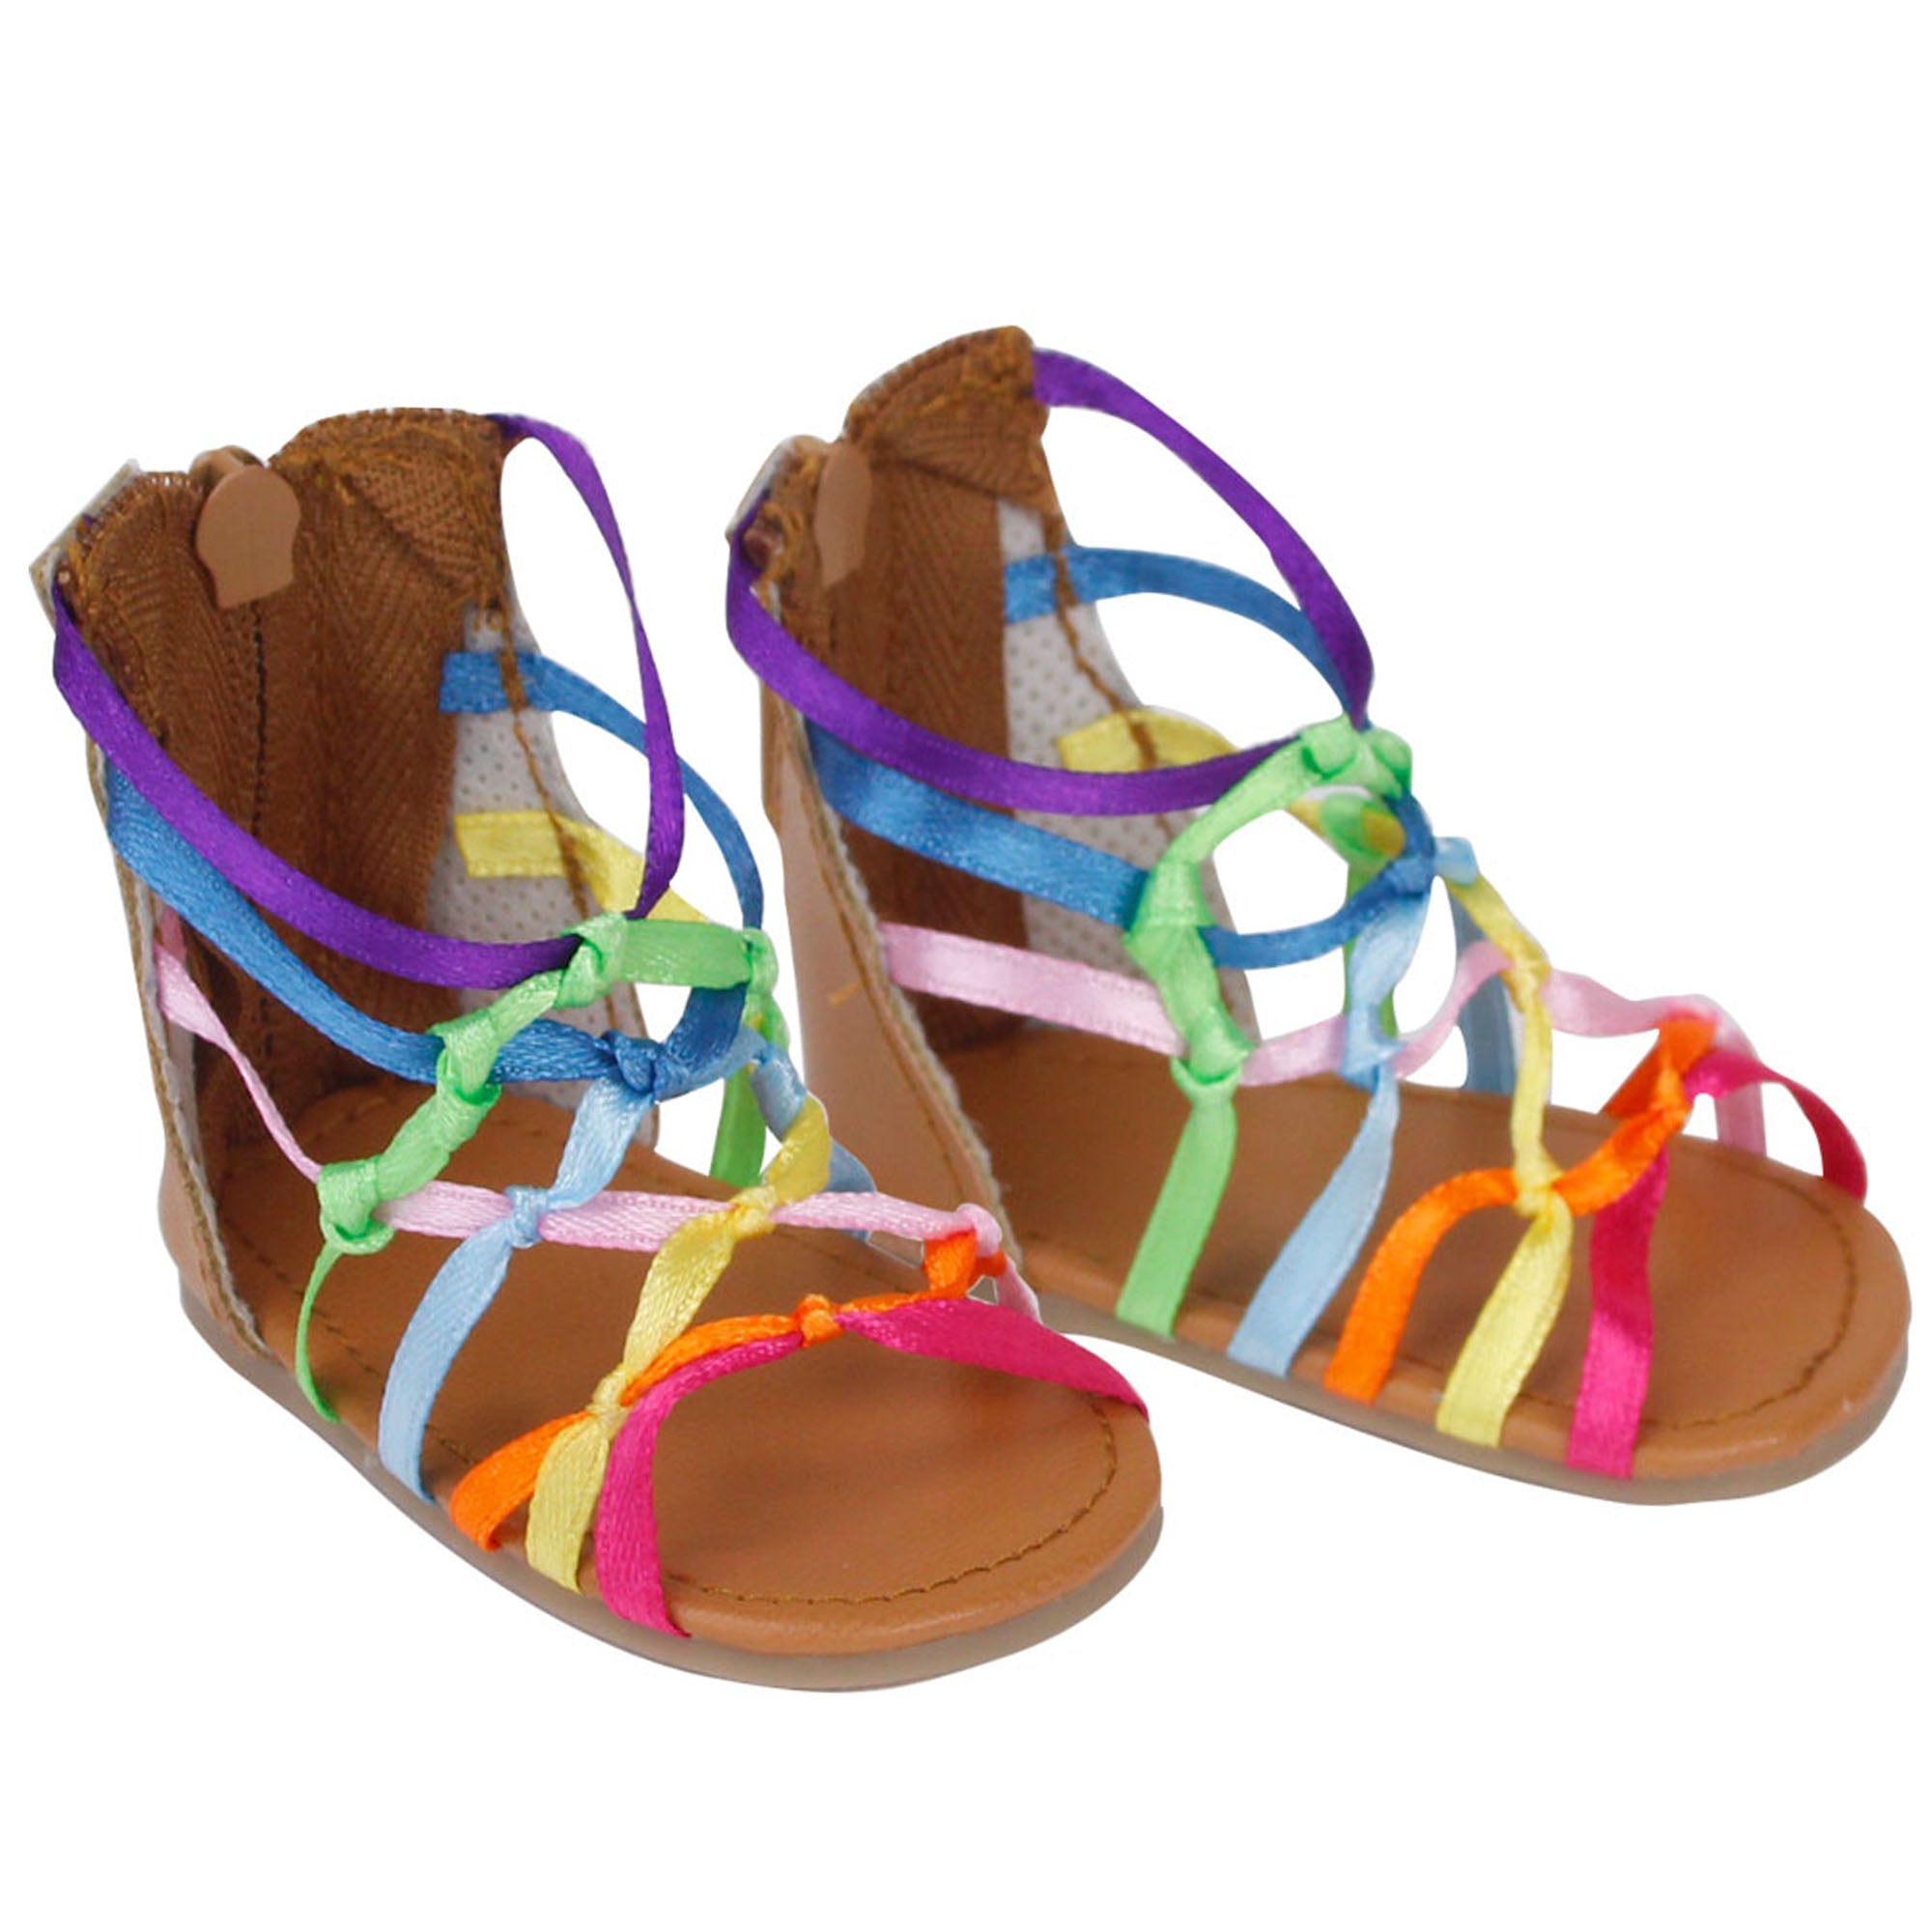 Sophia’s Colorful Gladiator-Style Knot Sandals with Zip-Up Back for 18” Dolls, Rainbow